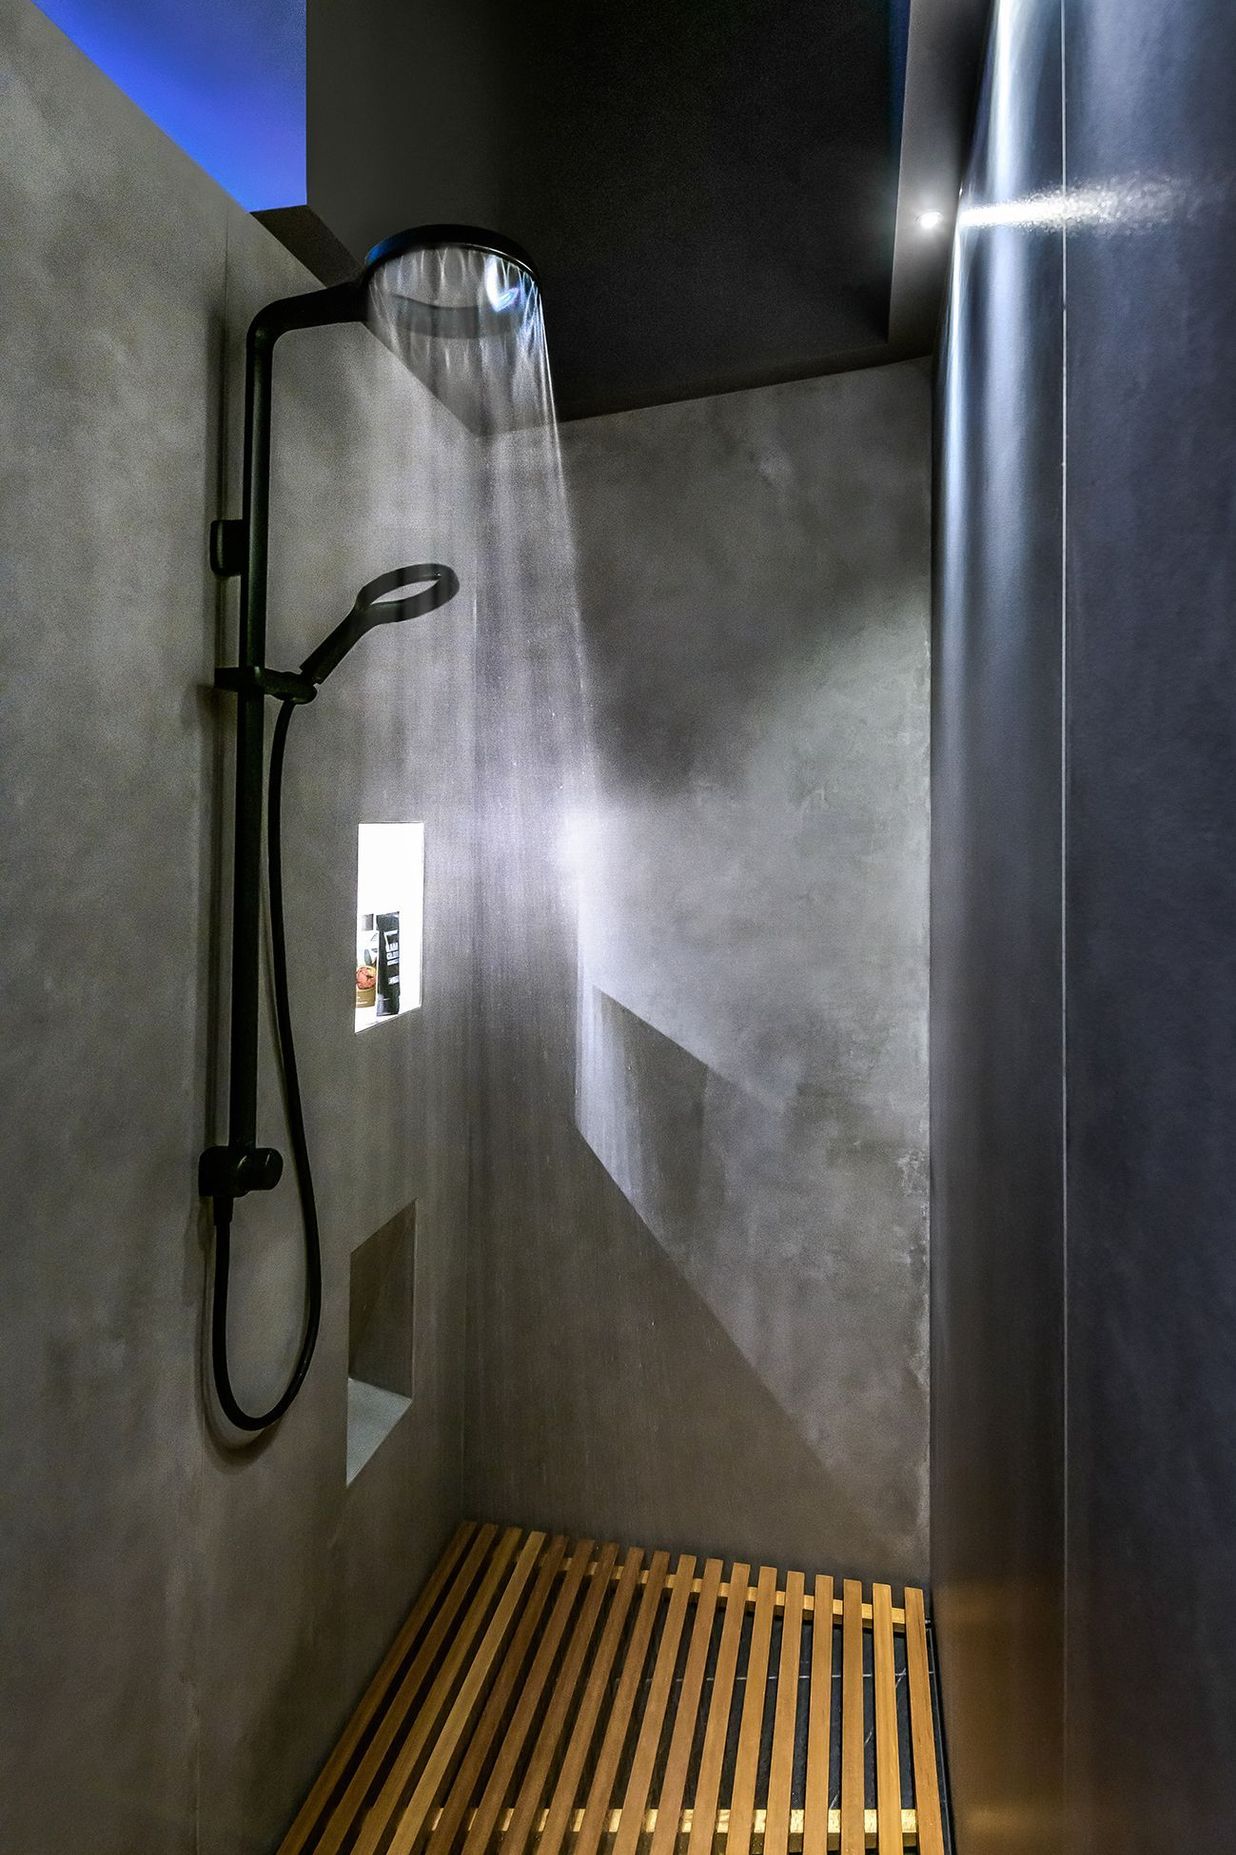 The minimalist shower has a Japanese feel with.a slatted timber floor.